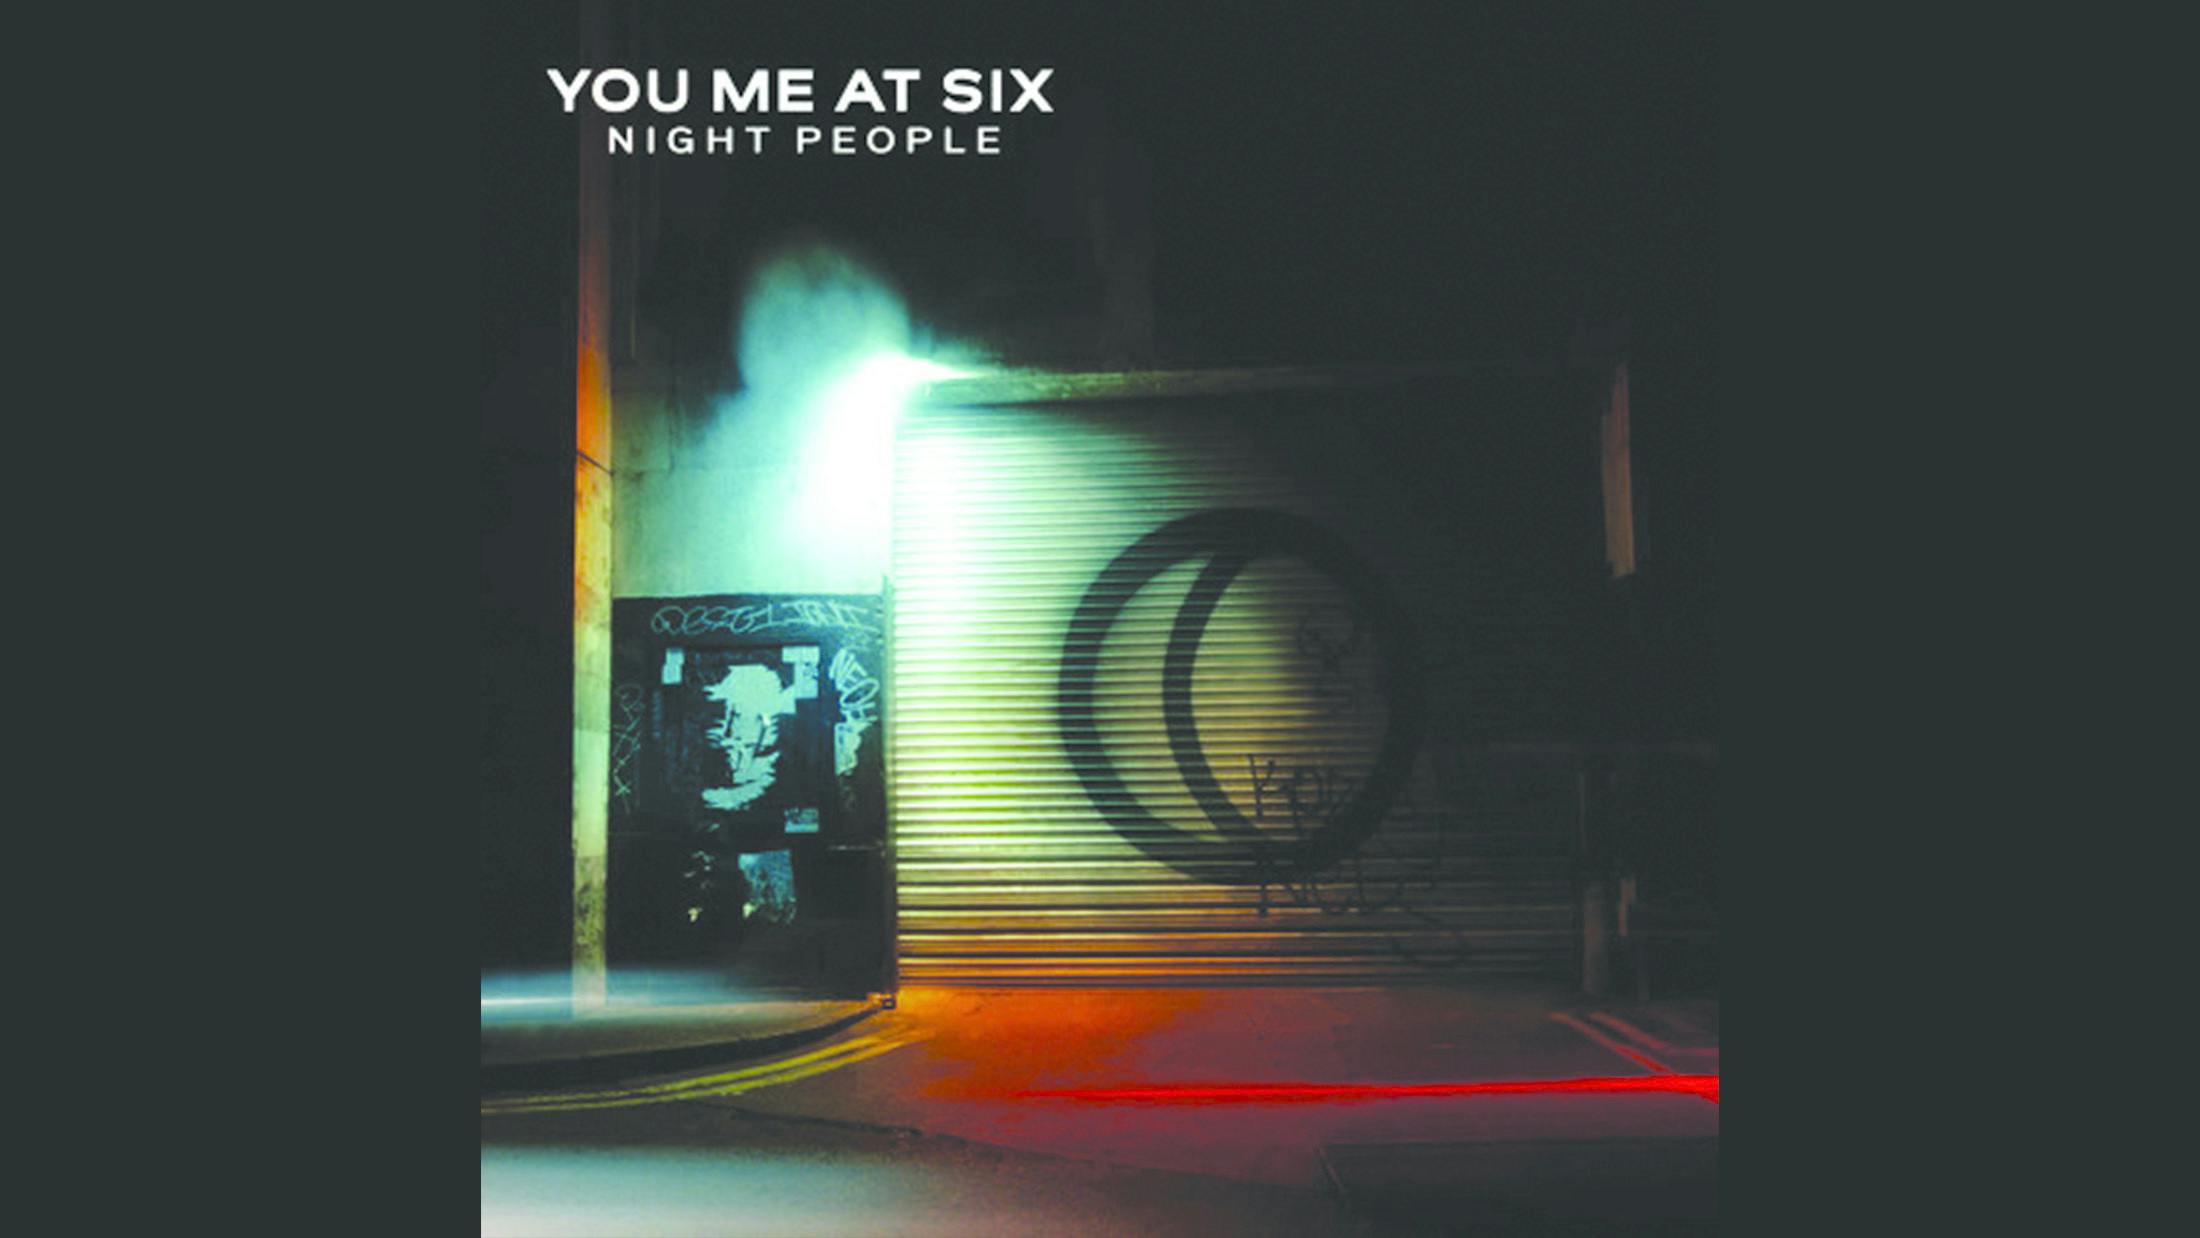 You Me At Six were already one of Britain’s beefiest prospects at the turn of 2017. It’s testament to the Surrey rockers’ unquenchable thirst for grandeur that this outsized fifth LP arrived with eyes pointed upwards: its laser-sights set past arenas, all the way to stadia. That’s not to say there’s anything sugarcoated or overly-mainstreamed about Night People. It was marinated, through its recording, in the country culture of Nashville, Tennessee and plumbed a gloomier, grittier vein than before. Plus, Josh Franceschi’s brooding rockstar credentials had never-before been so nailed-on, and his band hadn’t come across more ready to cut a swathe across the world’s grandest stages.